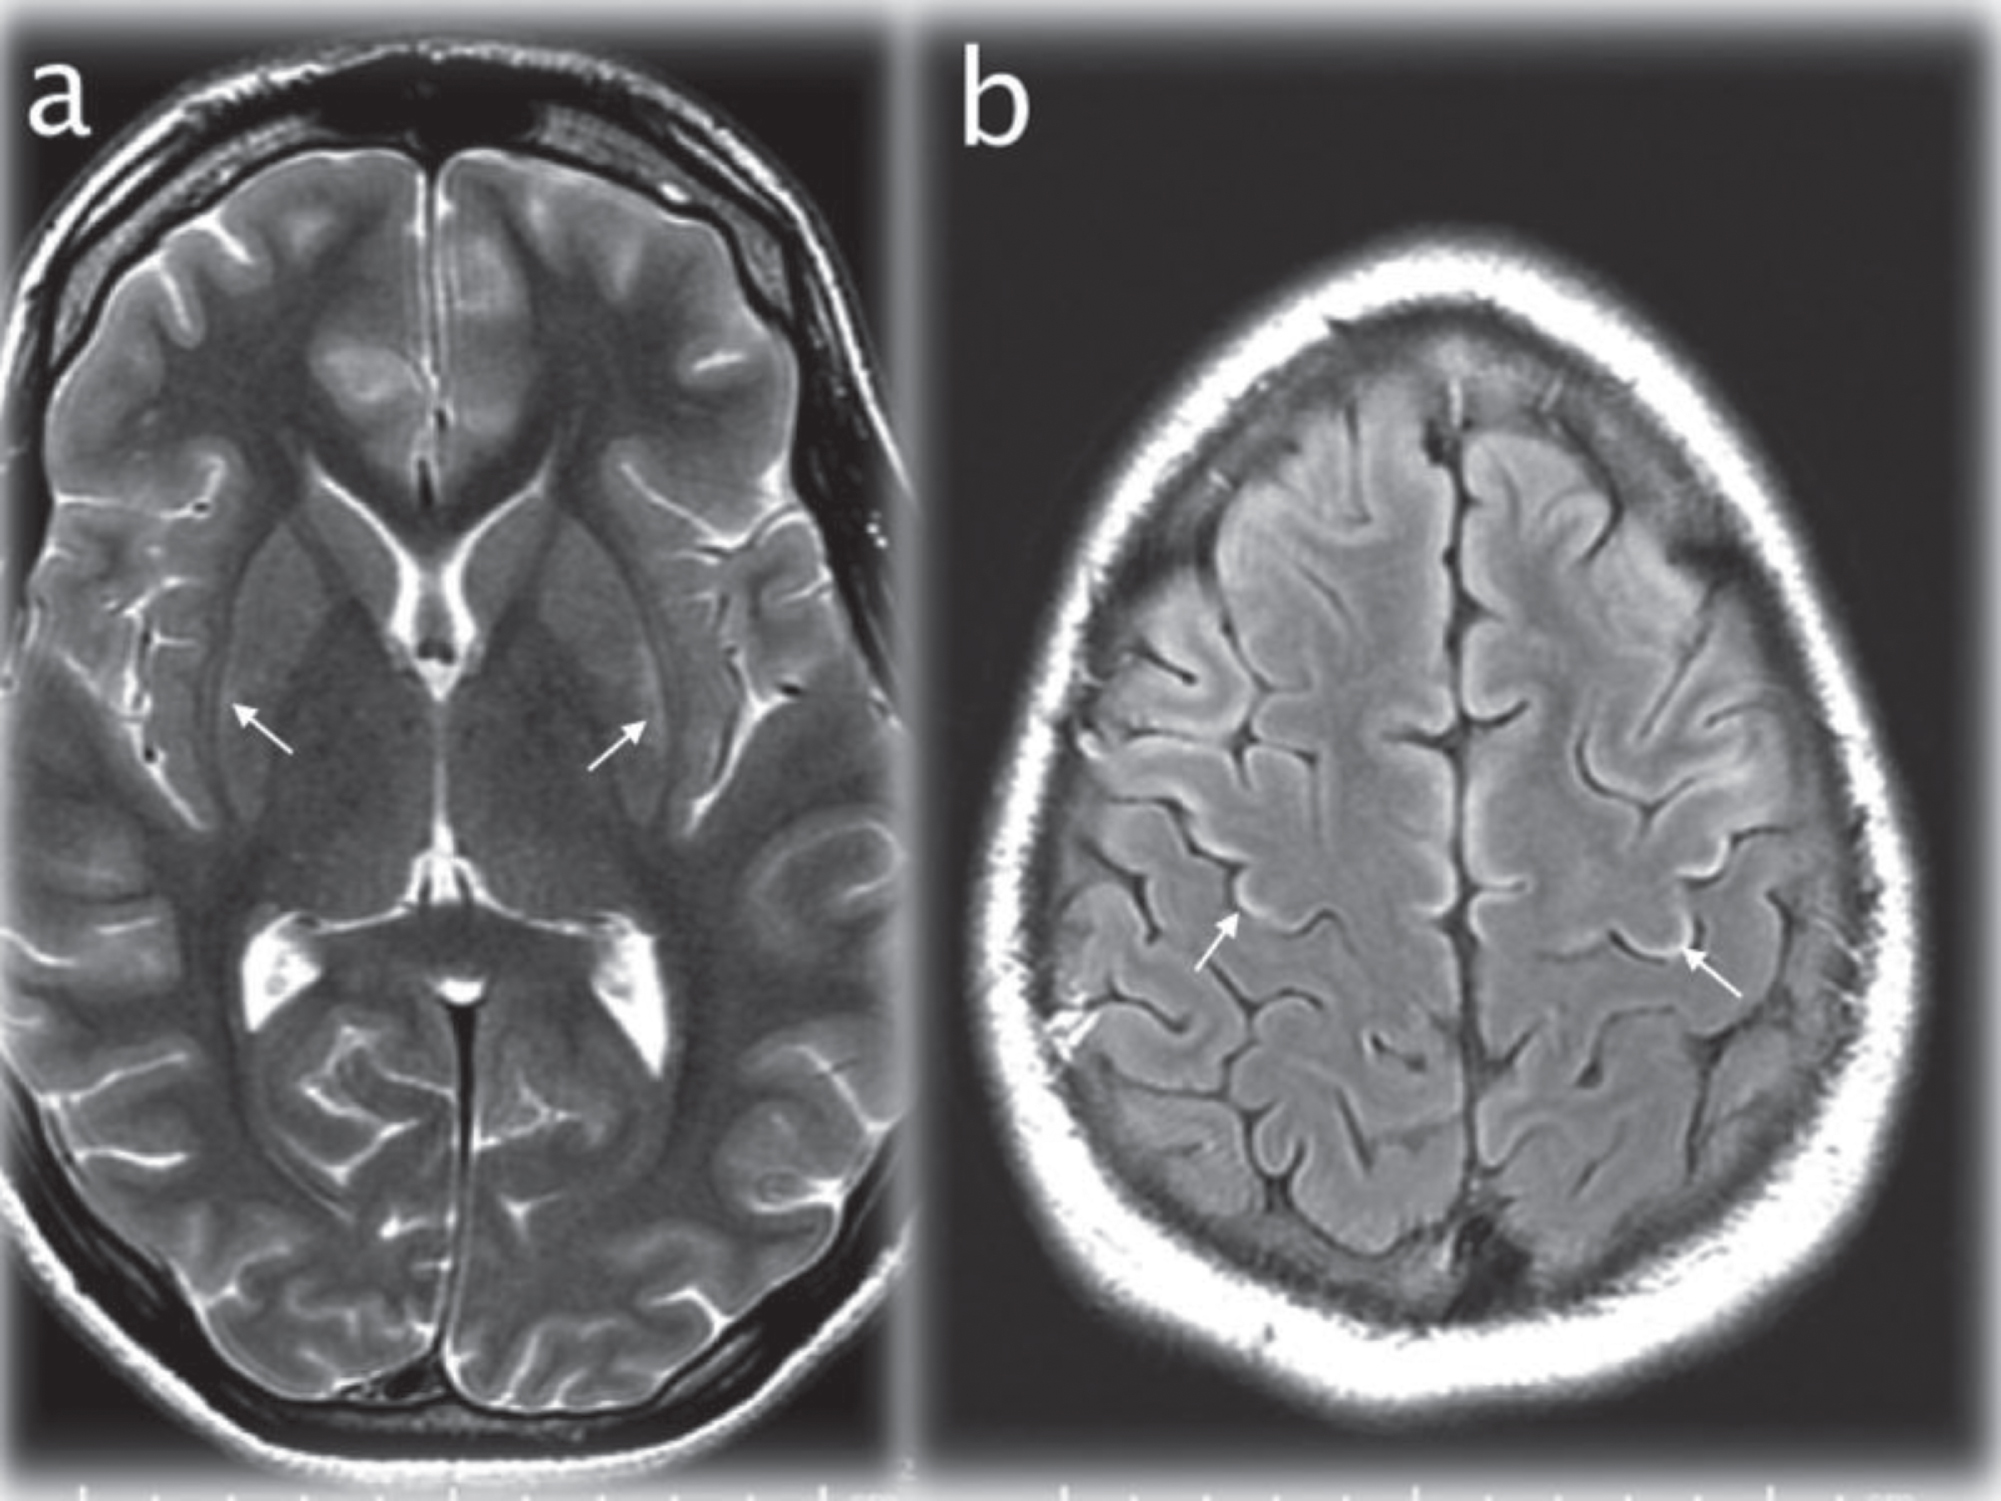 Axial T2WI (TR/TE msec, 4228/98) through the basal ganglia (a) showing maximal signal changes in the lateral putamen at 17 days after admission (arrows). Axial T2 FLAIR image (IT/TR/TE msec, 2250/10000/144) at the cerebral vertex (b) demonstrating cortical hyperintensity in parts of the frontal lobes (for instance the motor strip, arrows) that developed at 28 days after admission.